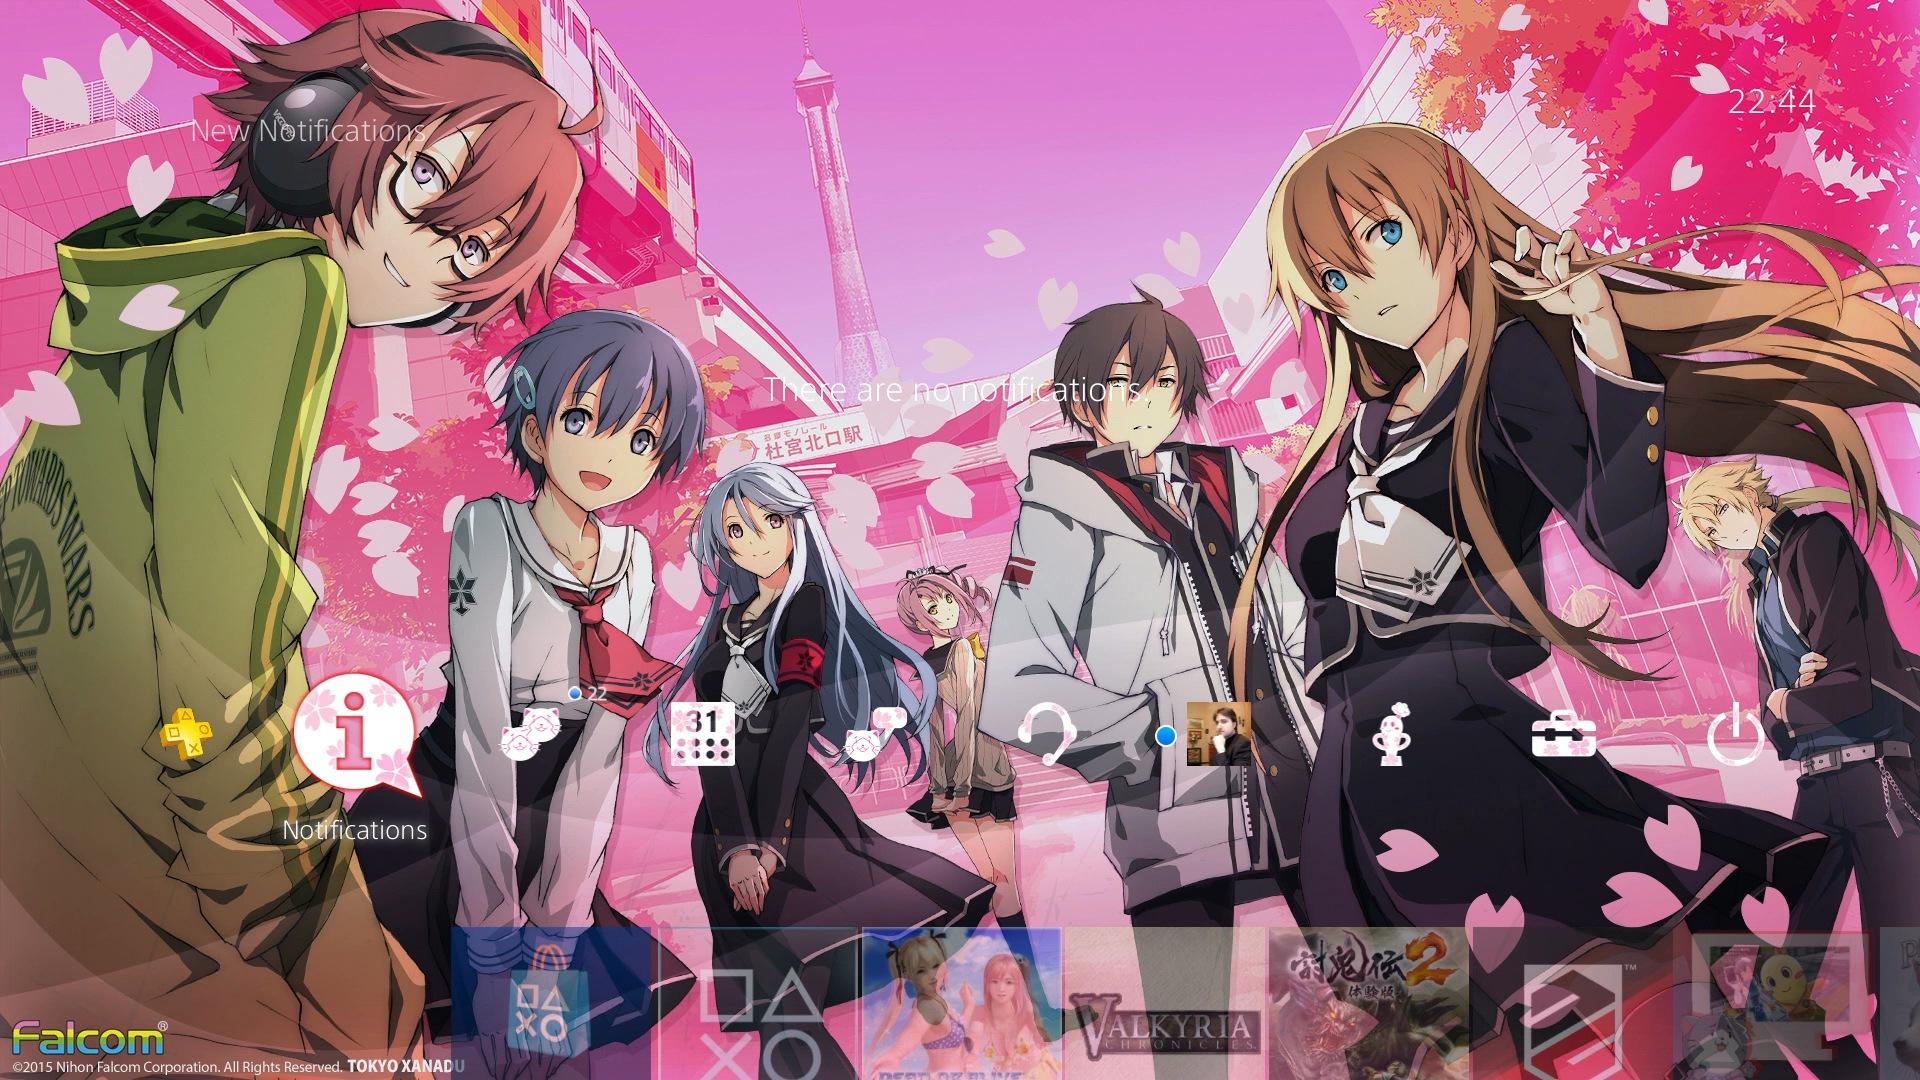 PS4 Gets Free Tokyo Xanadu Theme For a Limited Time